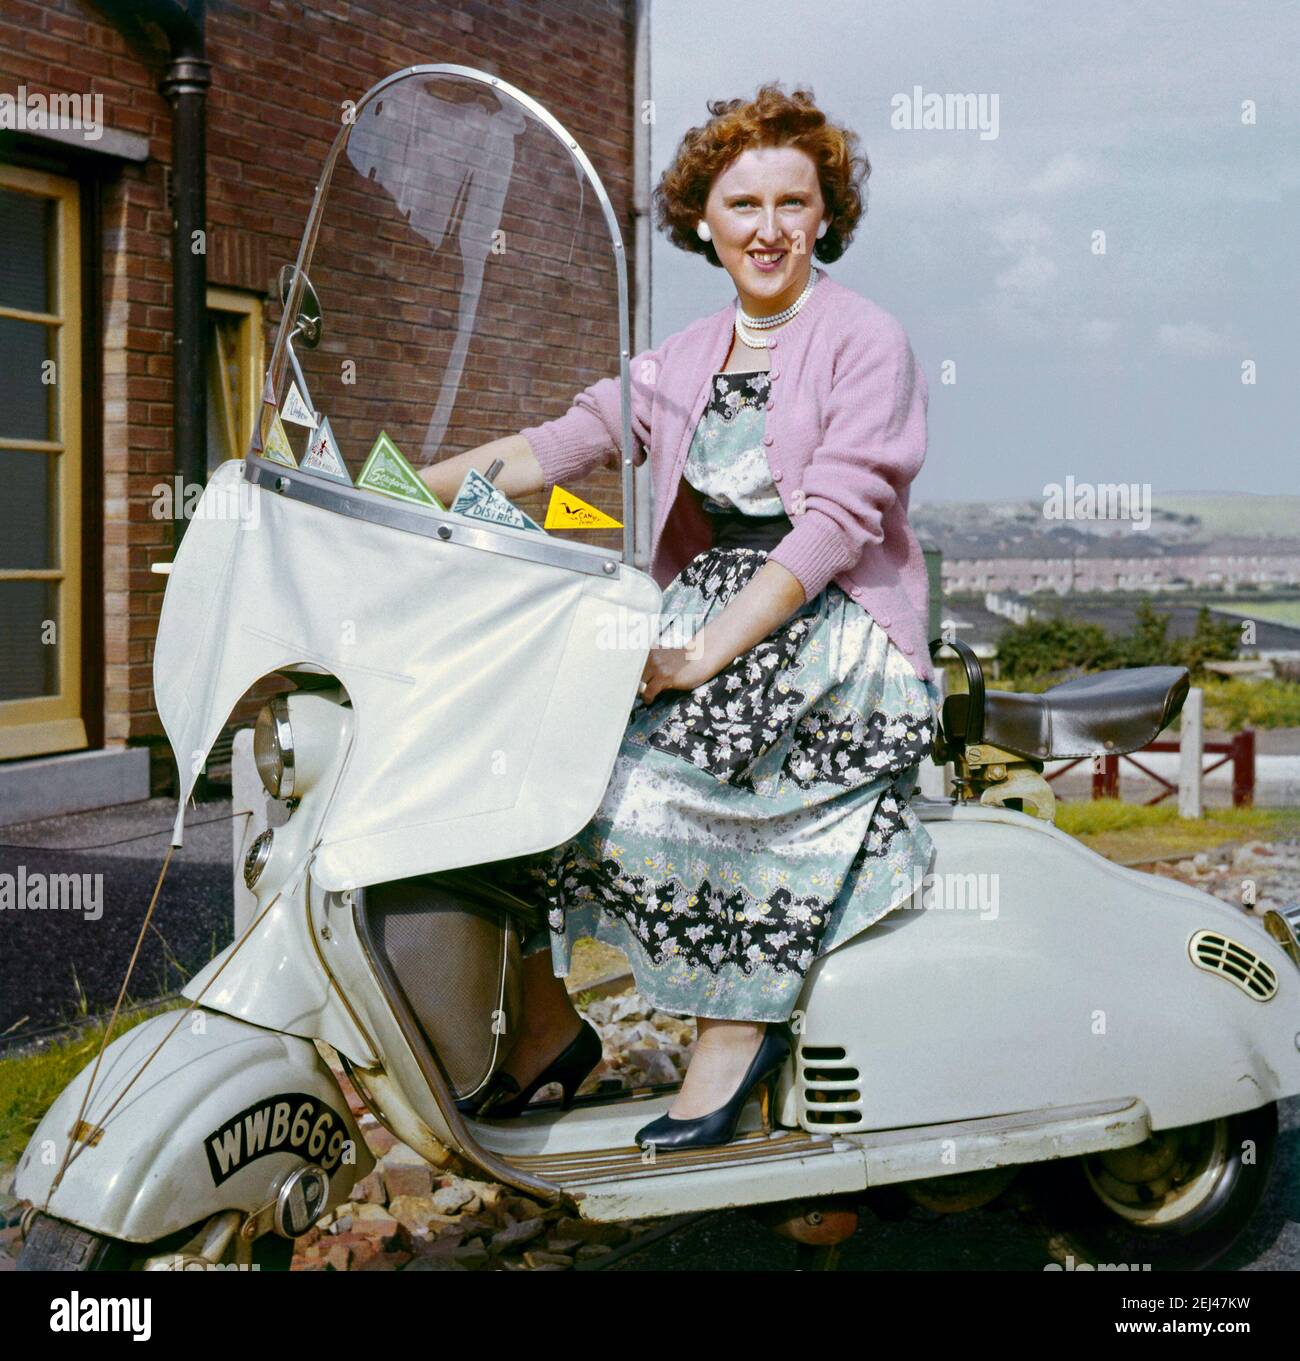 Young woman on Lambretta scooter c.1960. Places the scooter has visited are  displayed as pennants on the windshield - a vintage photograph from just  before the era when scooters became a 'mod'